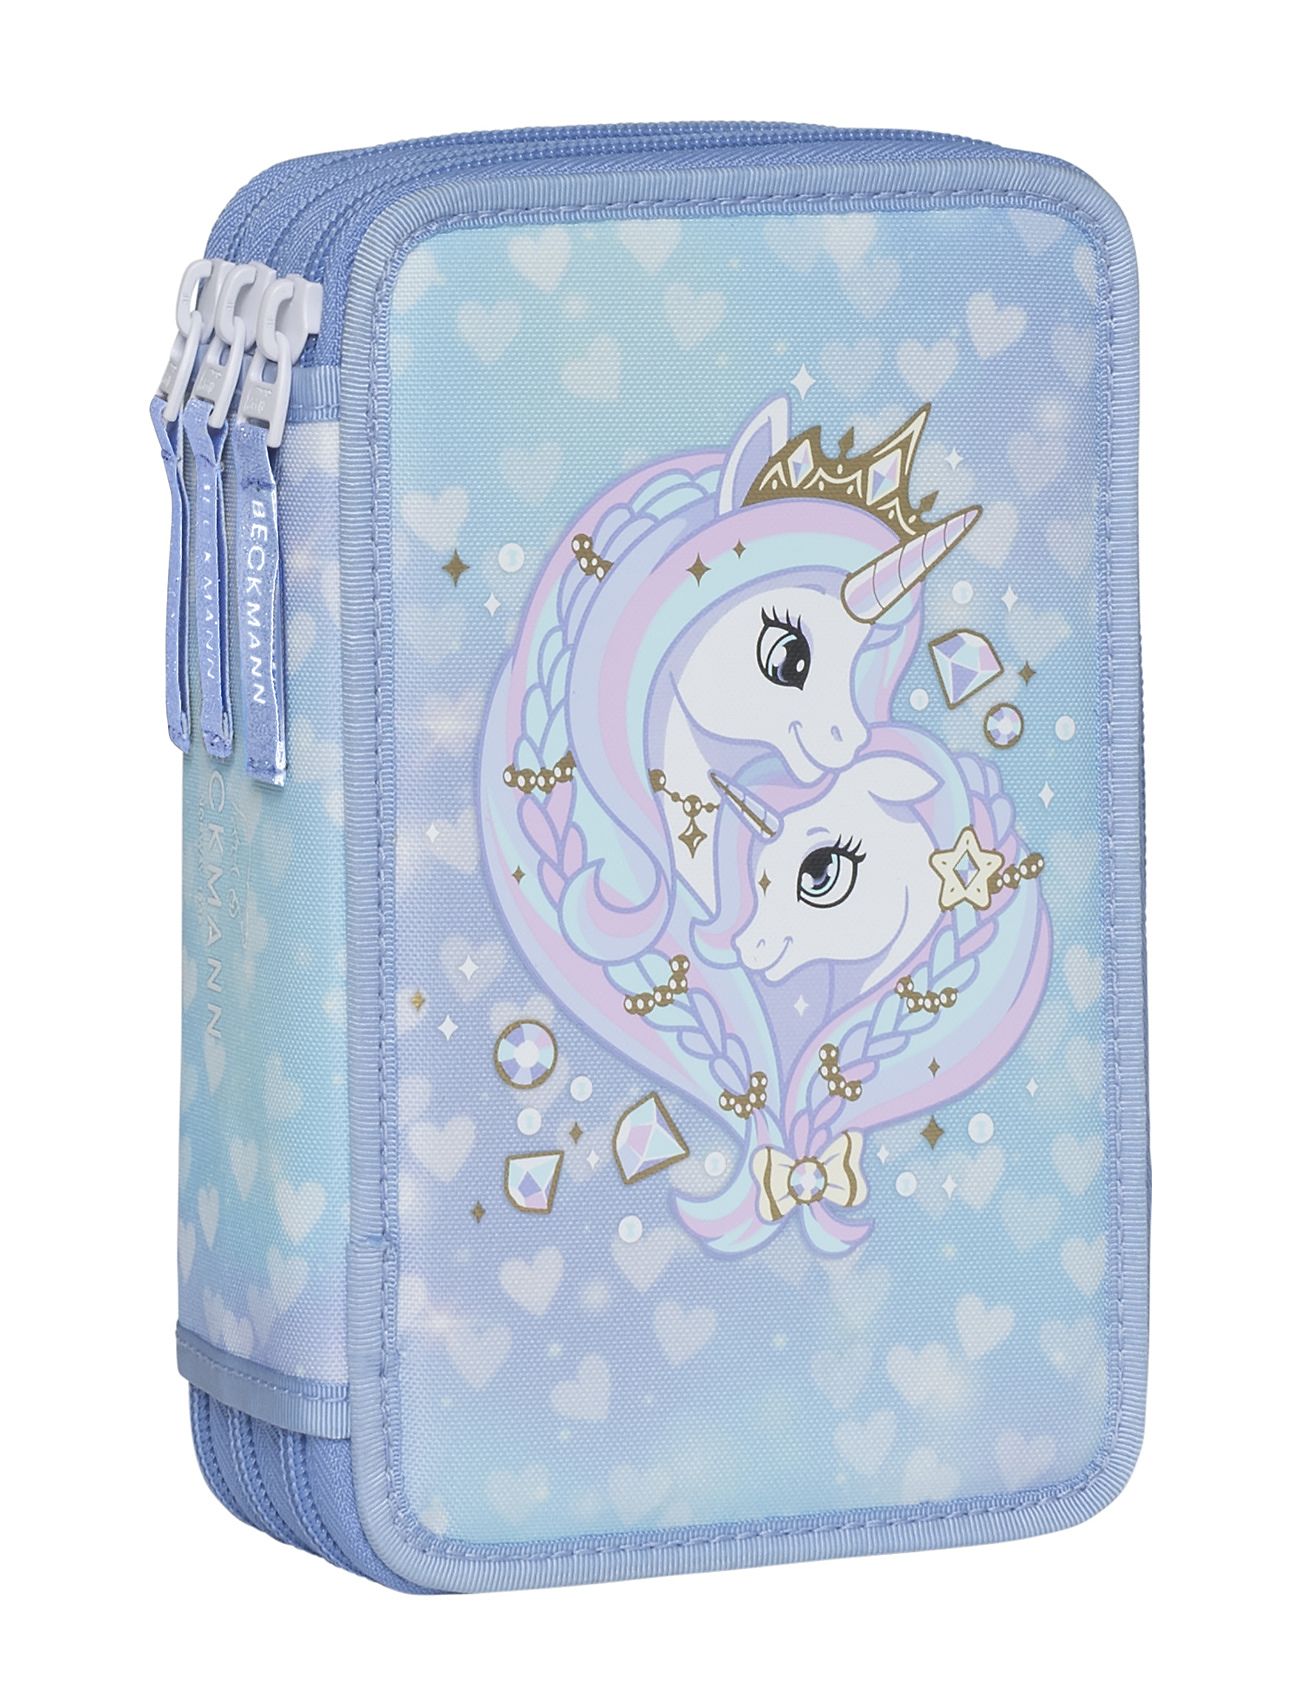 Three Section Pencil Case W/Content - Unicorn Princess Ice B Accessories Bags Pencil Cases Blue Beckmann Of Norway